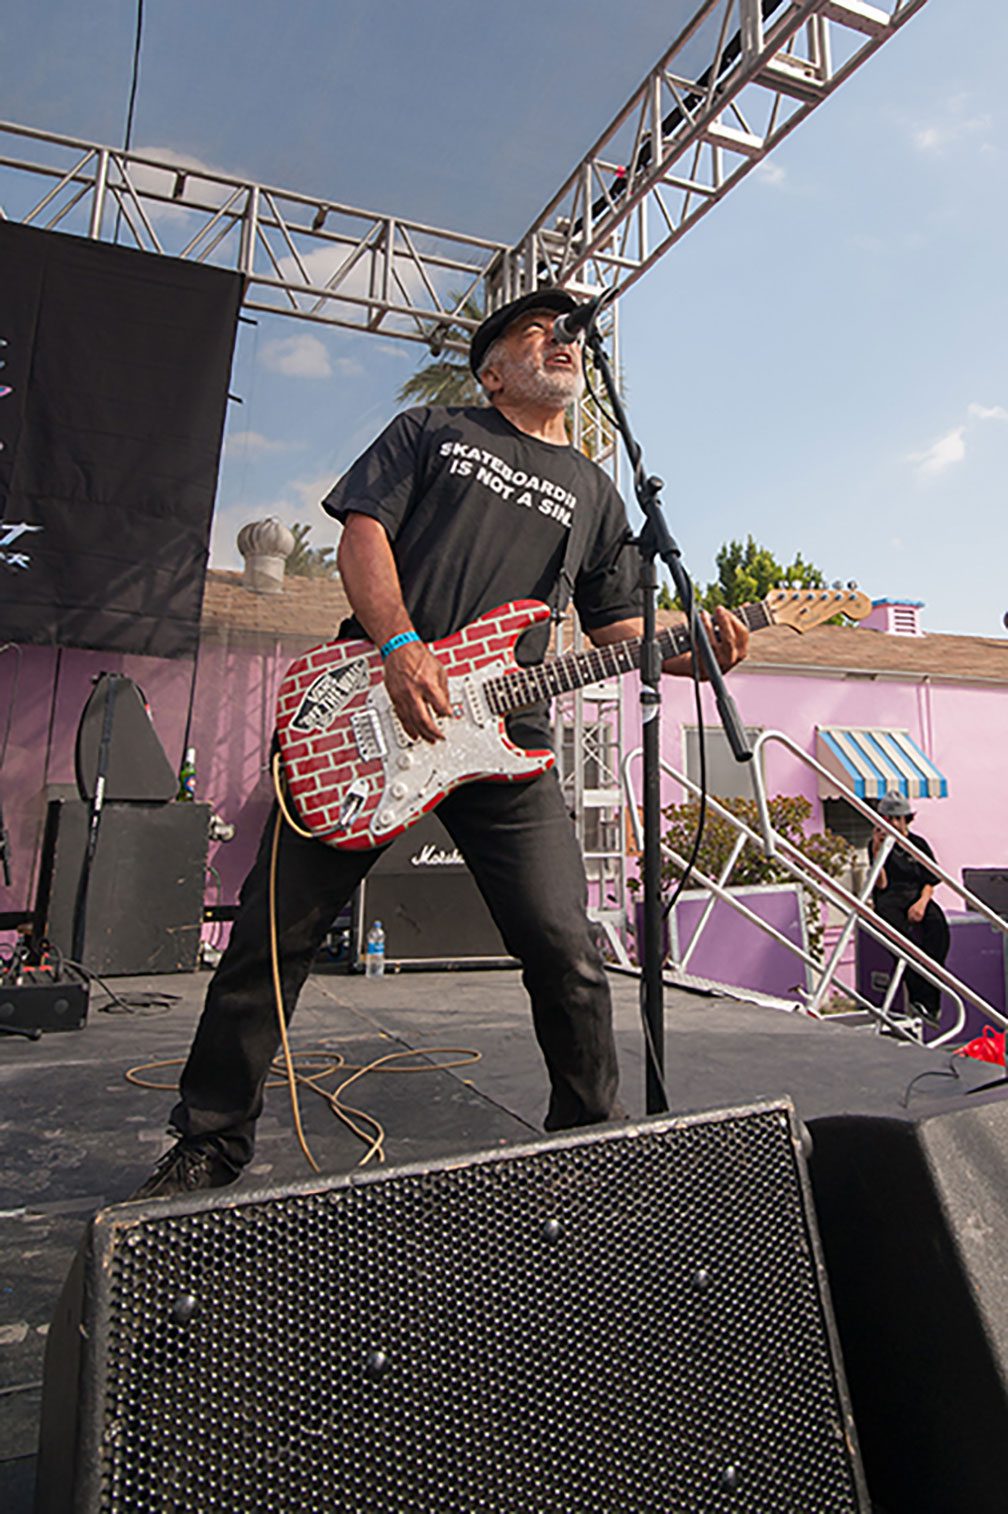 Steve Caballero with his band Urethane. Photo by Alan Presutti